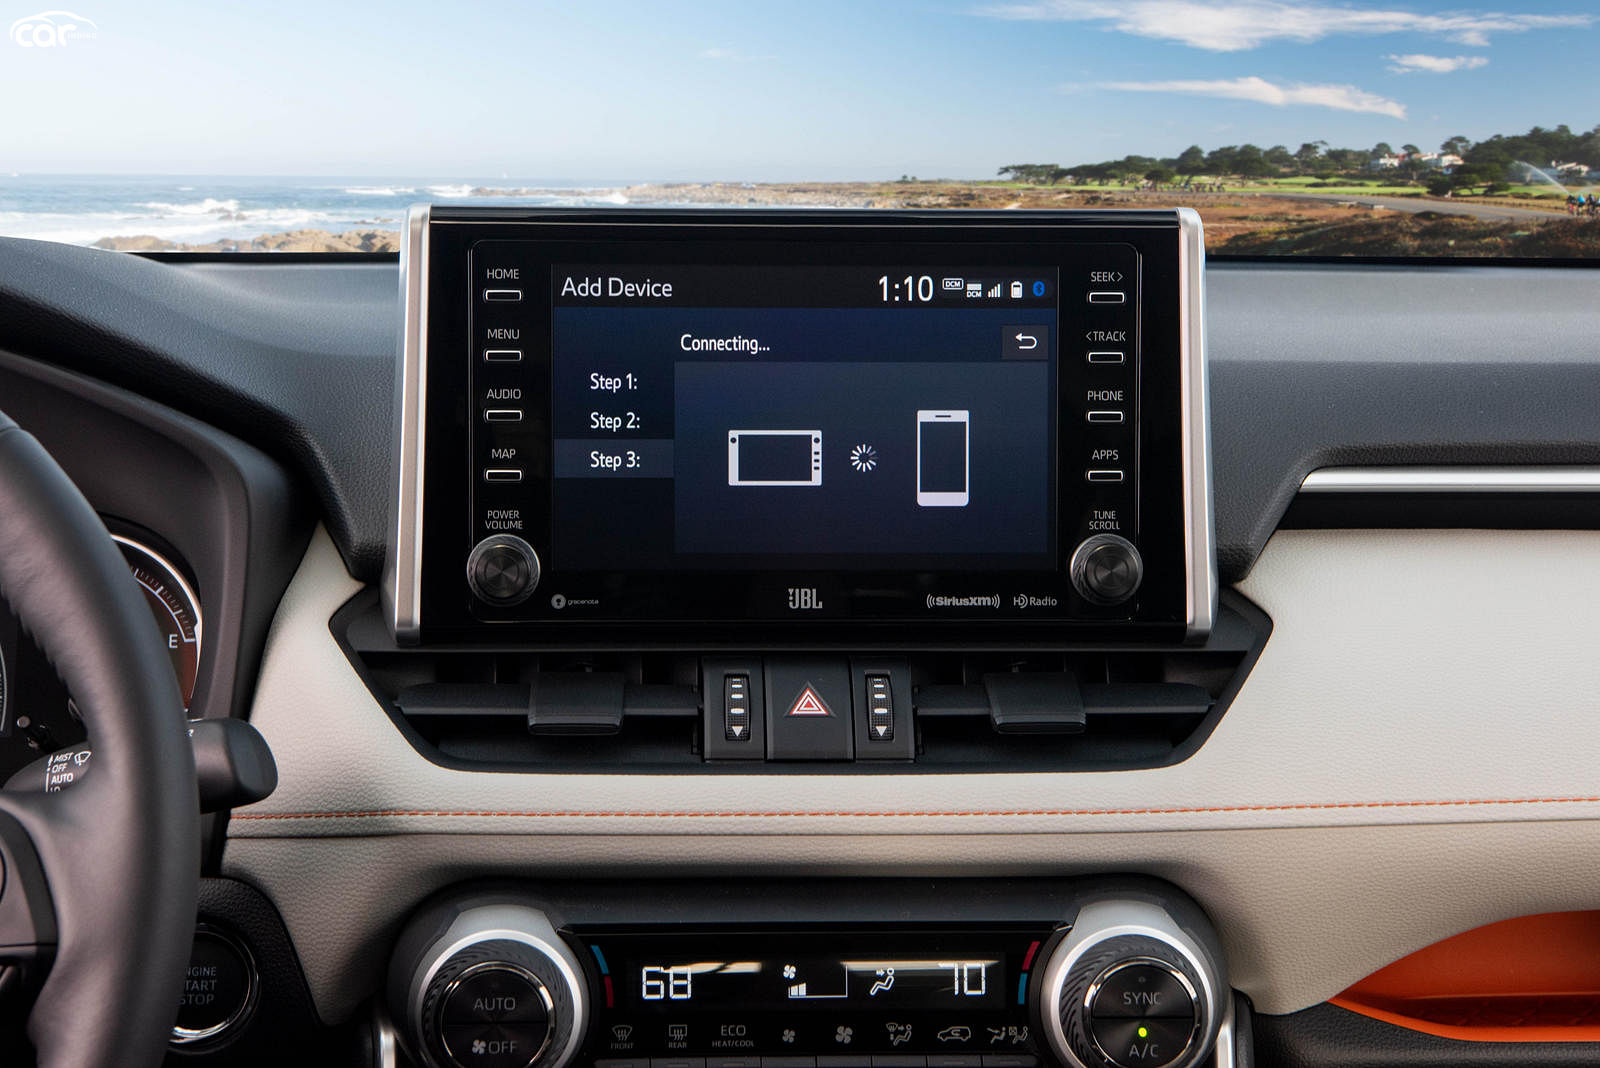 2022 Toyota RAV4 Interior Review Seating, Infotainment, Dashboard and Features